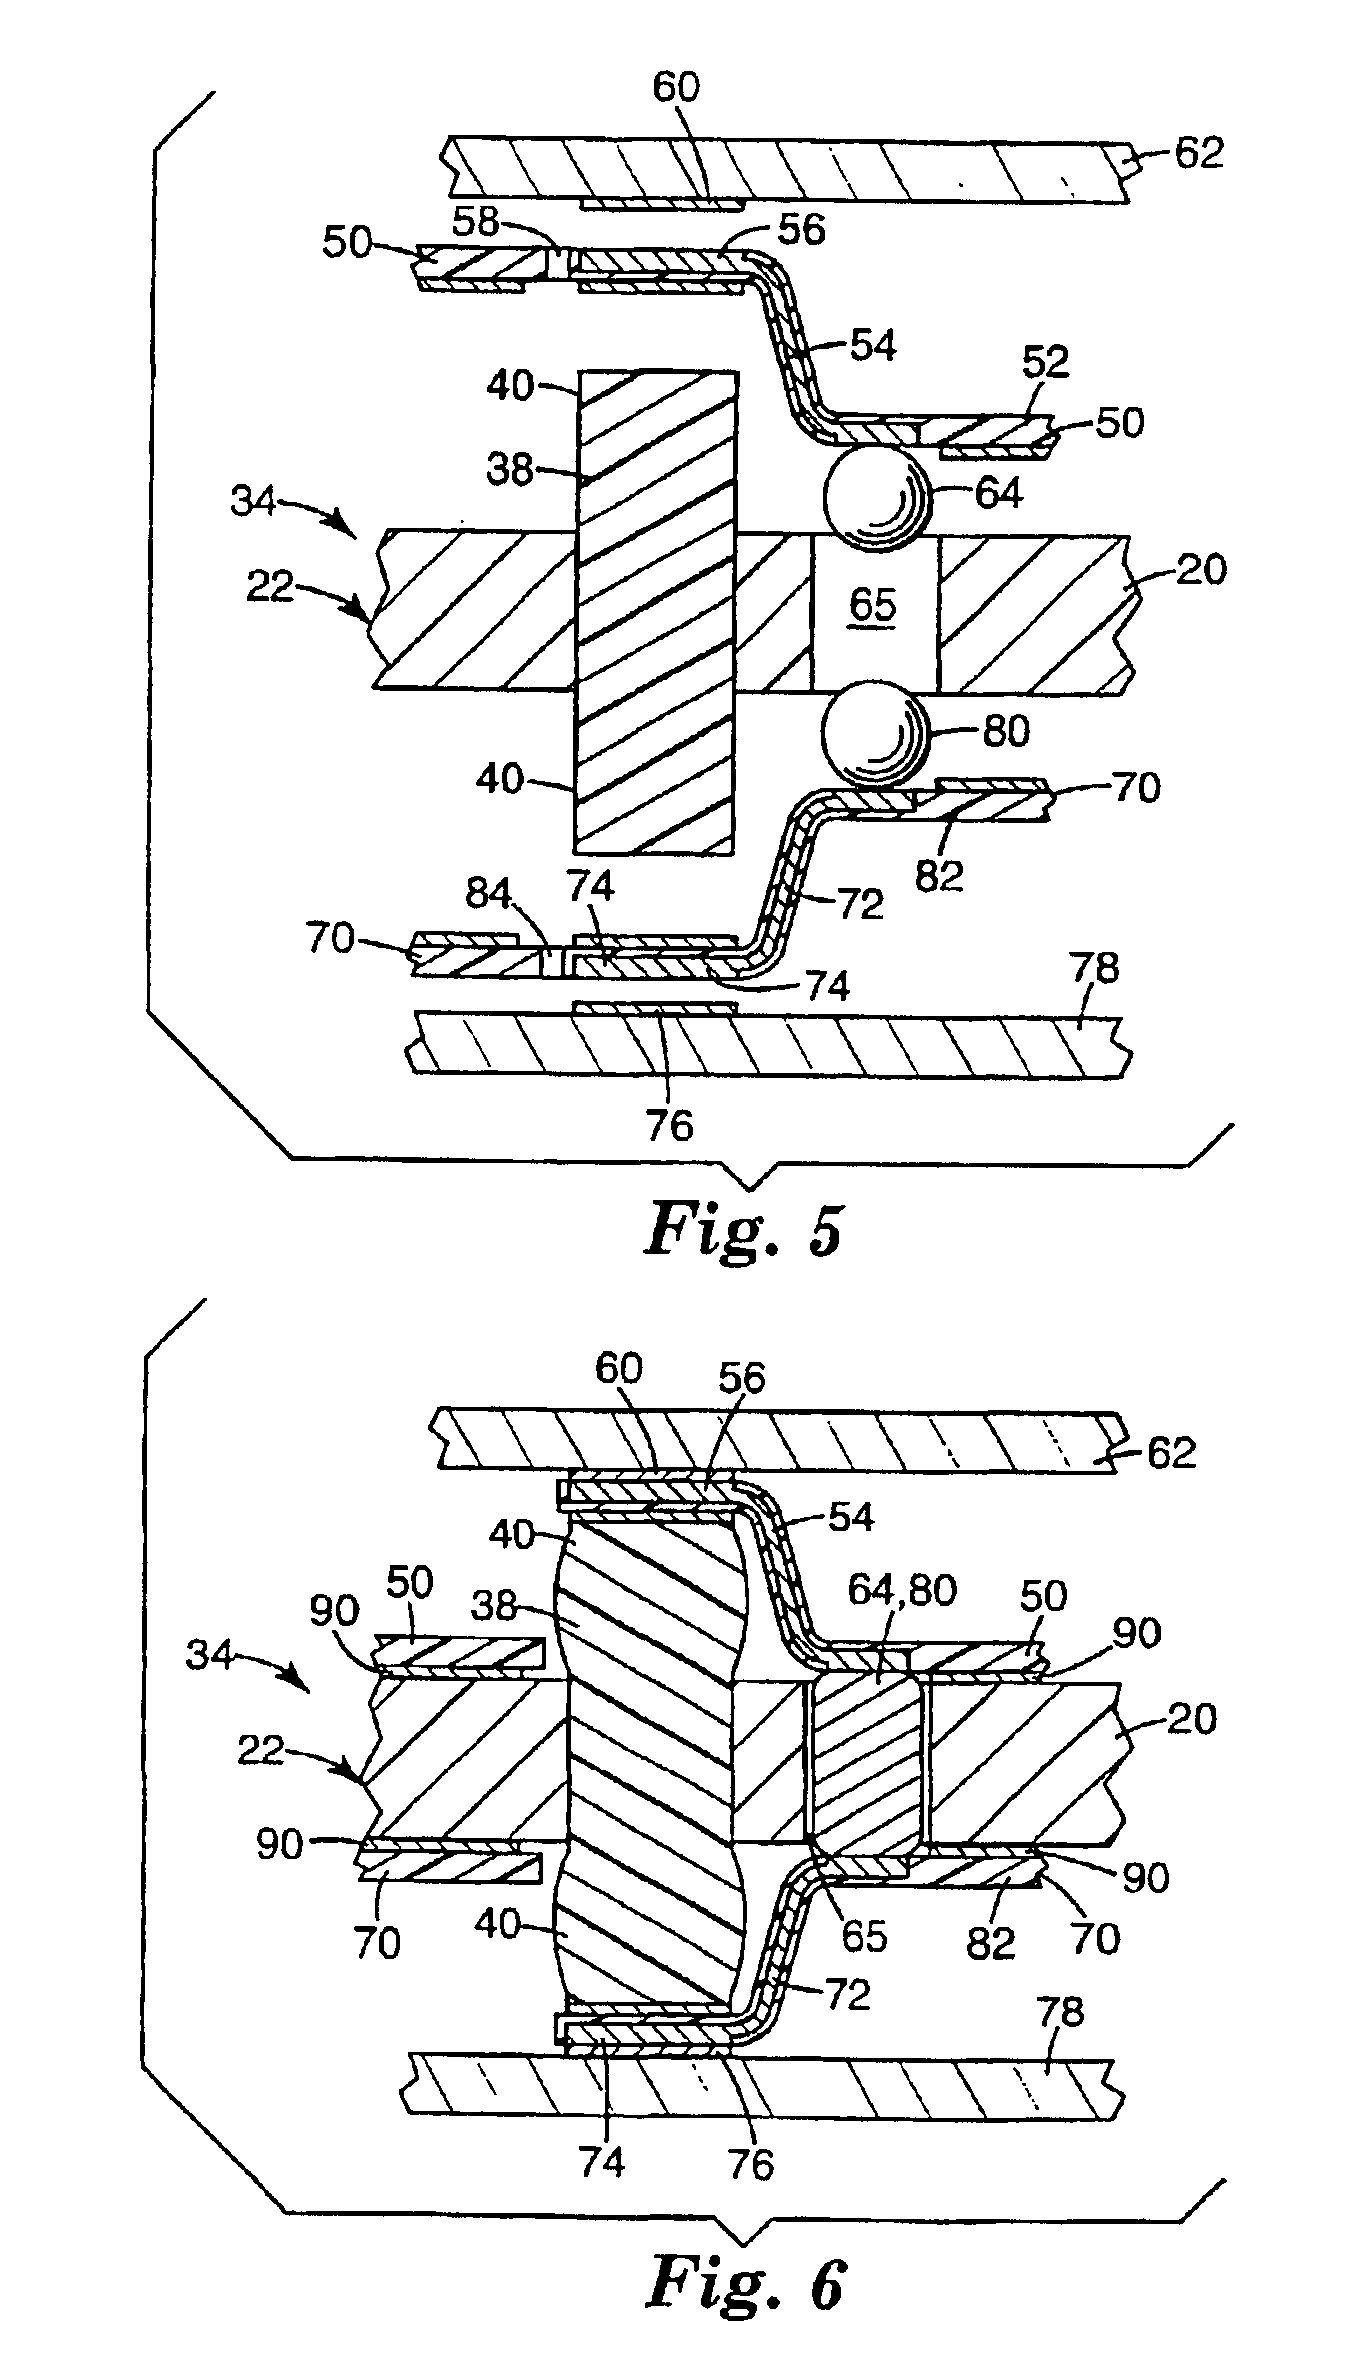 Flexible compliant interconnect assembly